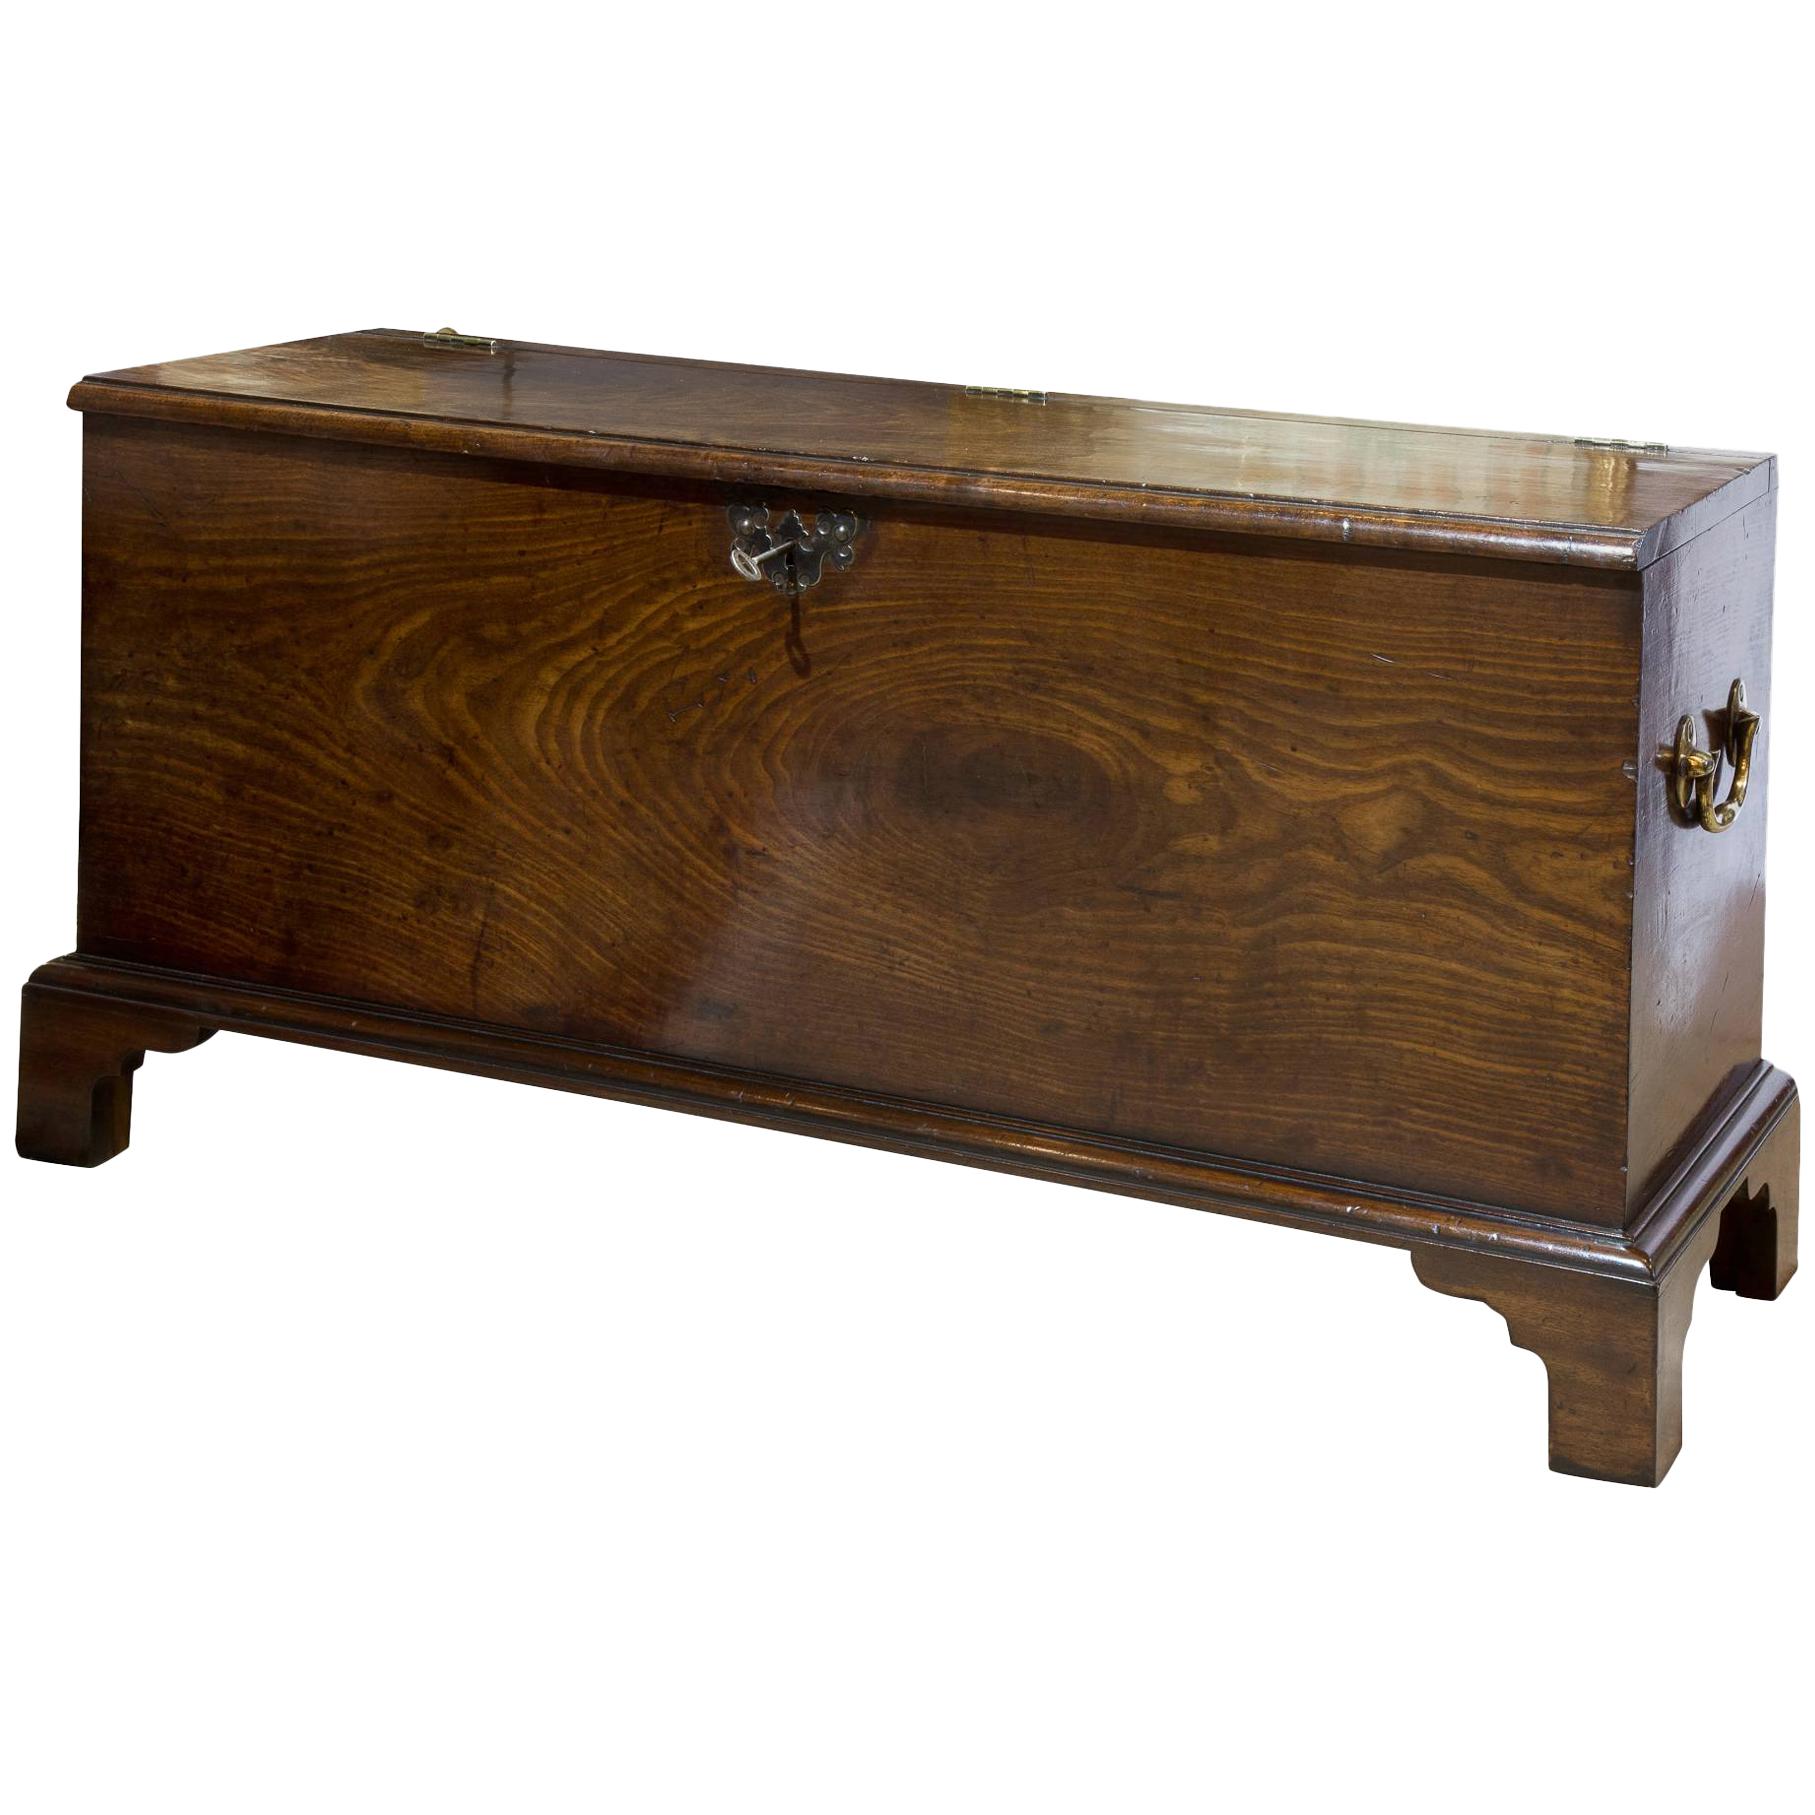 Mahogany Trunk or deed chest, Original carry handles, stamped W.S Pryor 1846 For Sale